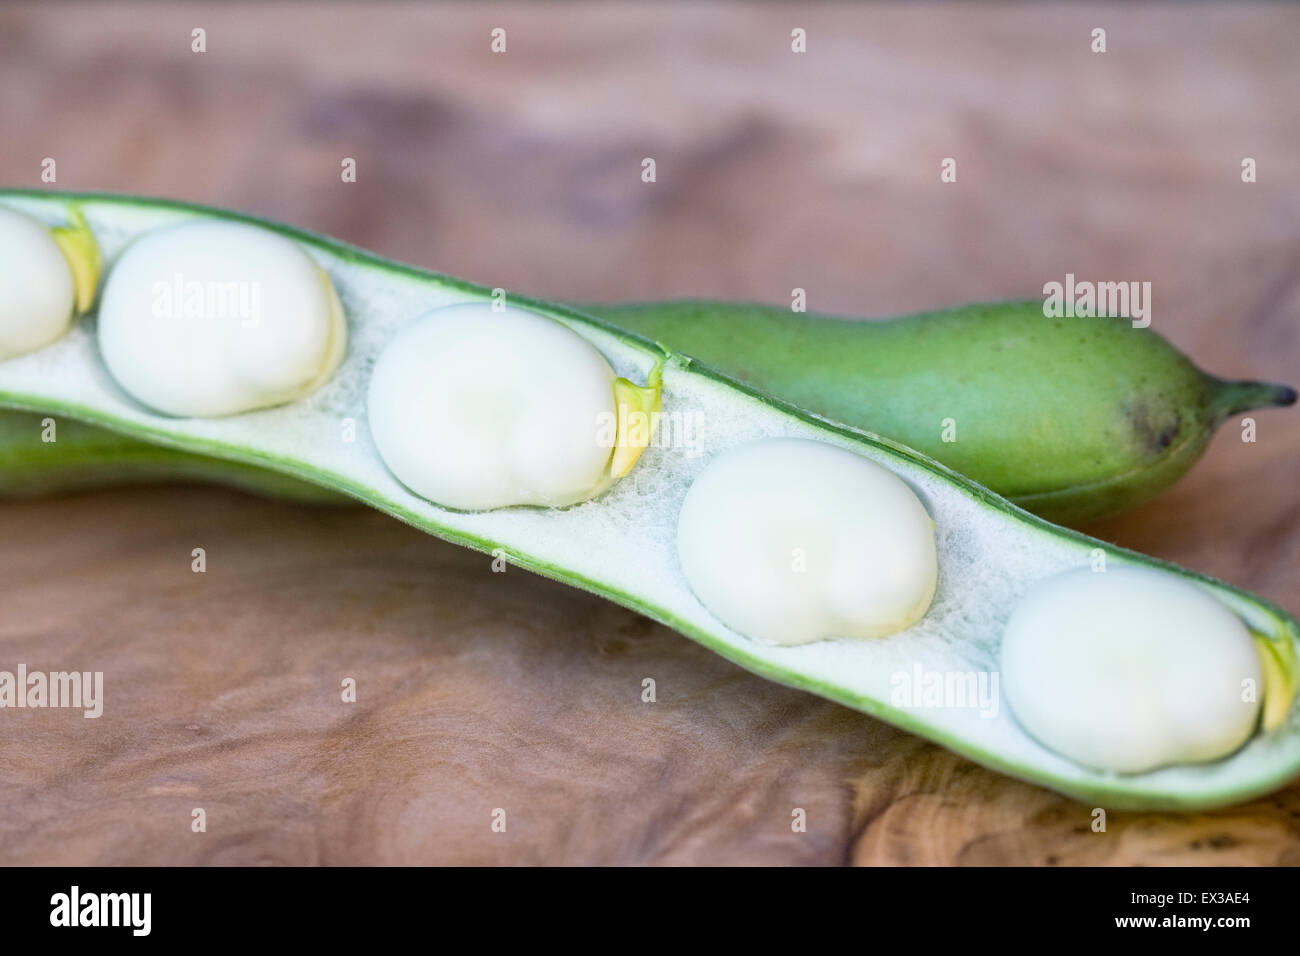 Vicia faba. Broad beans on a wooden board. Stock Photo